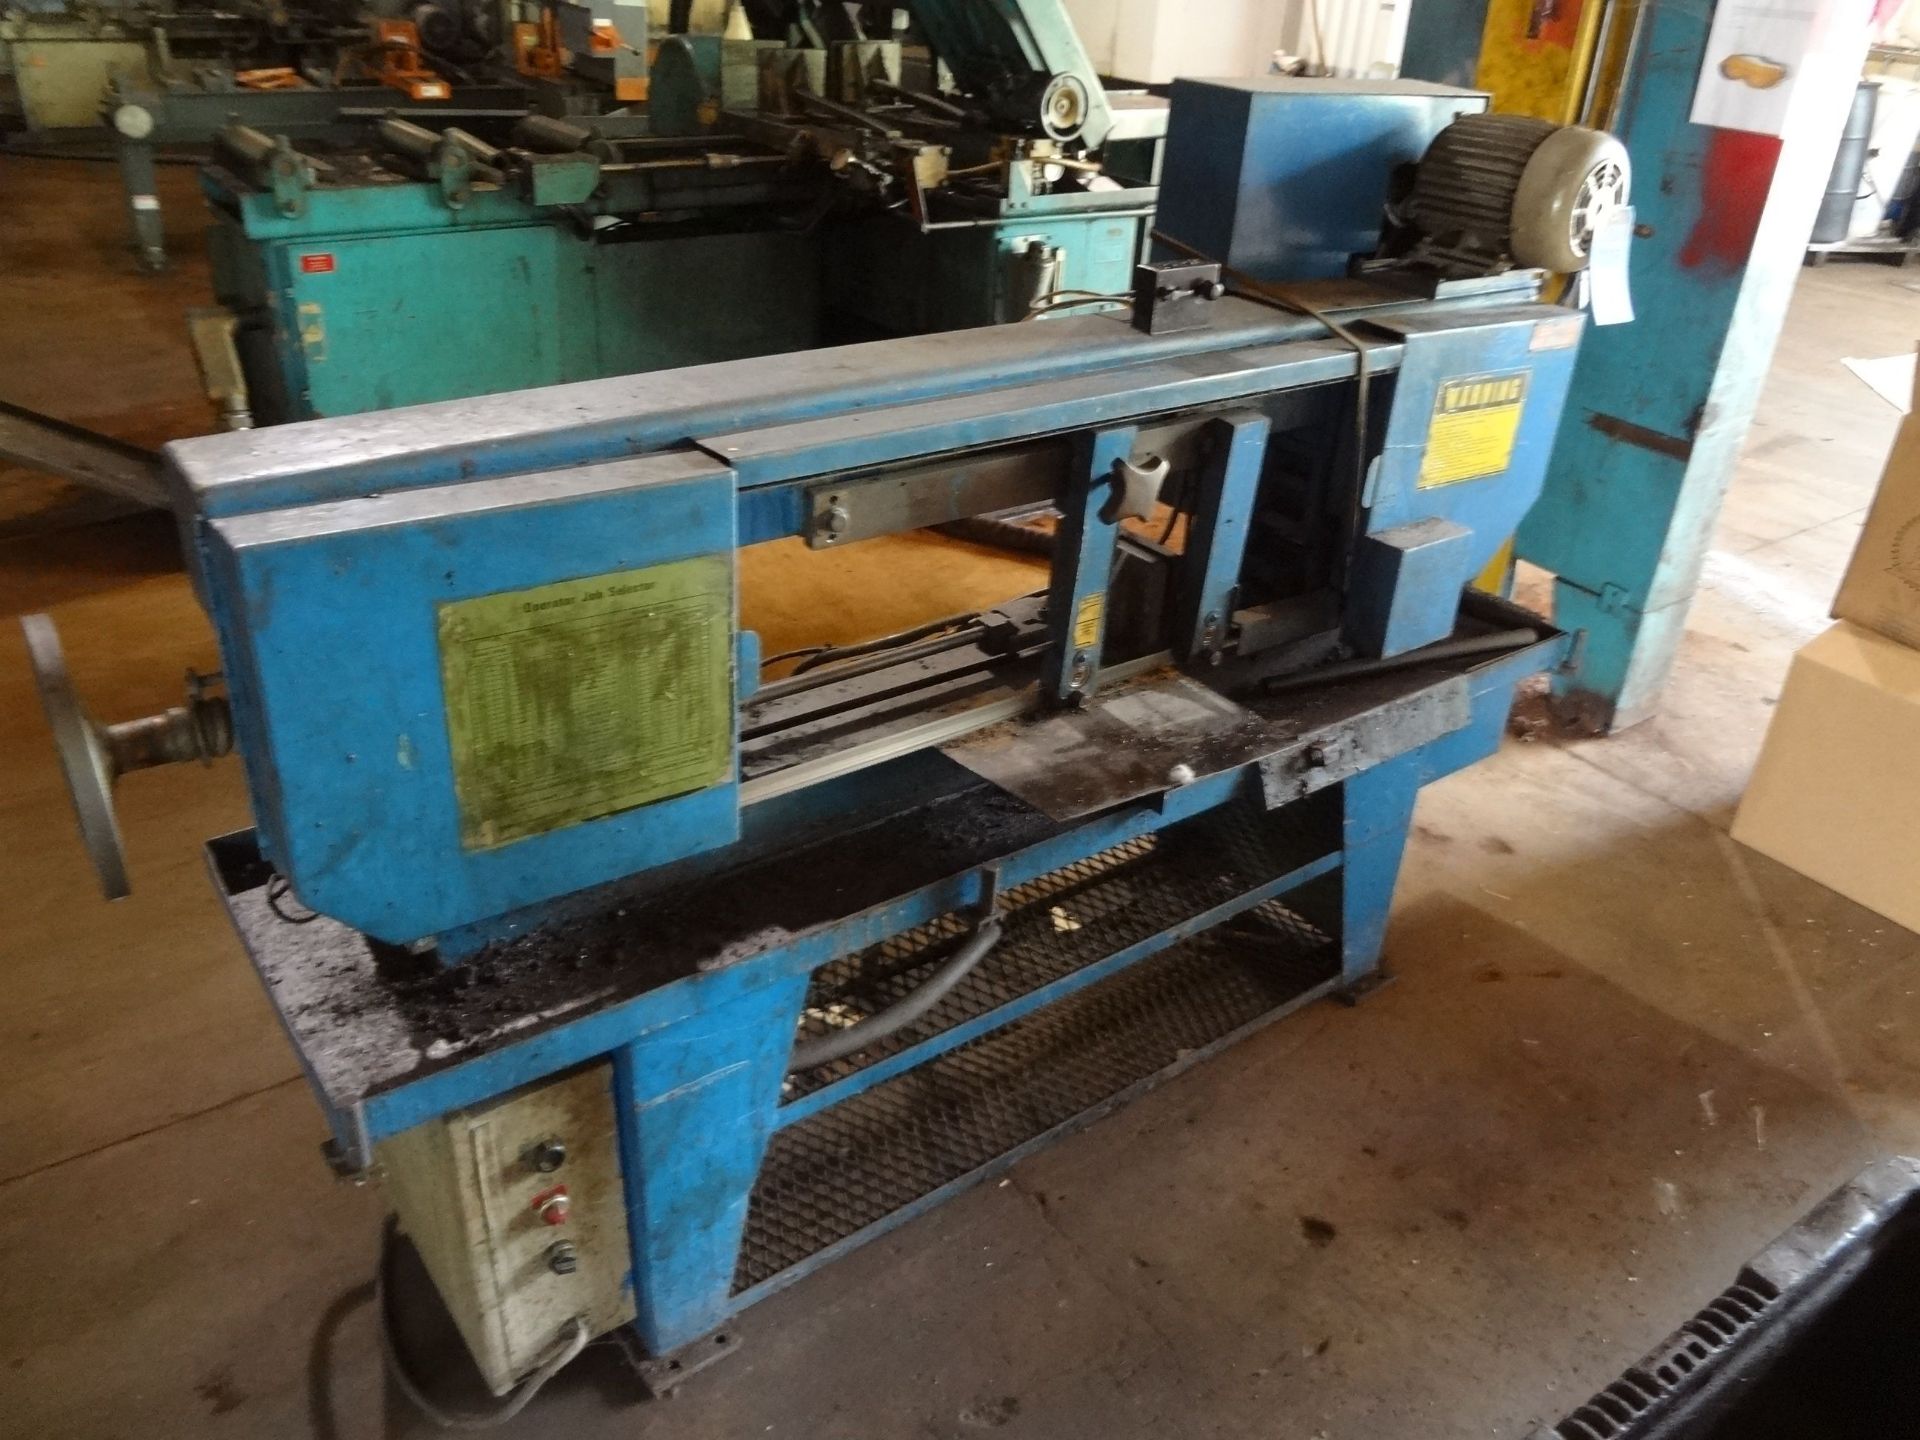 9" X 16" DOALL MODEL C-916 AUTOMATIC HORIZONTAL BAND SAW; S/N 438-85812, HYDRAULIC CLAMPING - Image 2 of 6